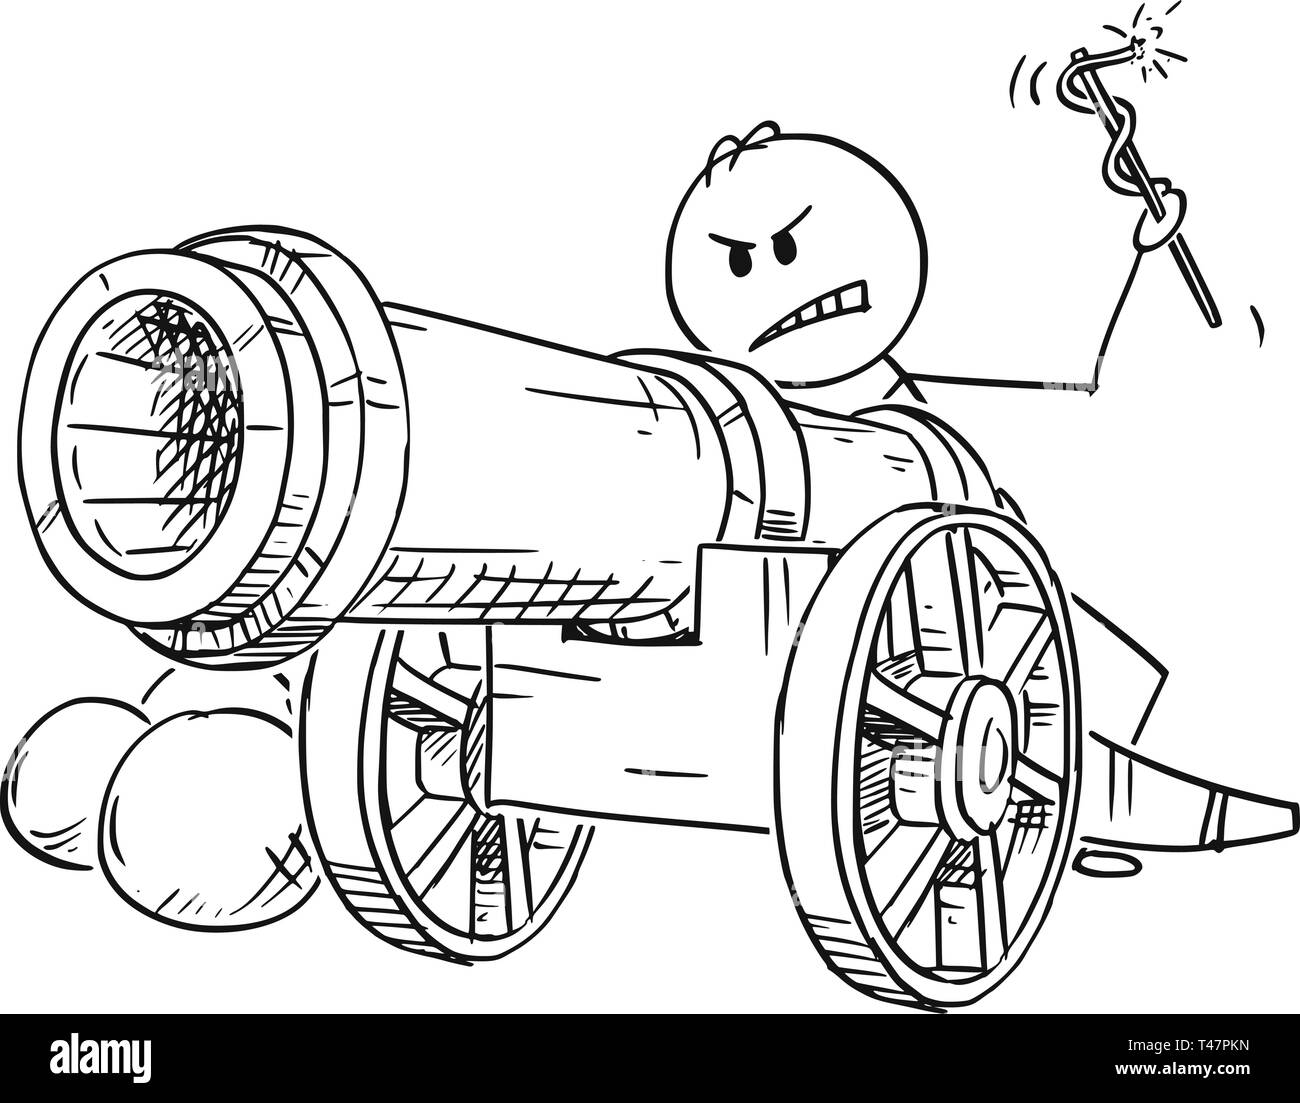 Cartoon stick figure drawing conceptual illustration of angry man or businessman targeting with antique cannon ready to fire. Stock Vector